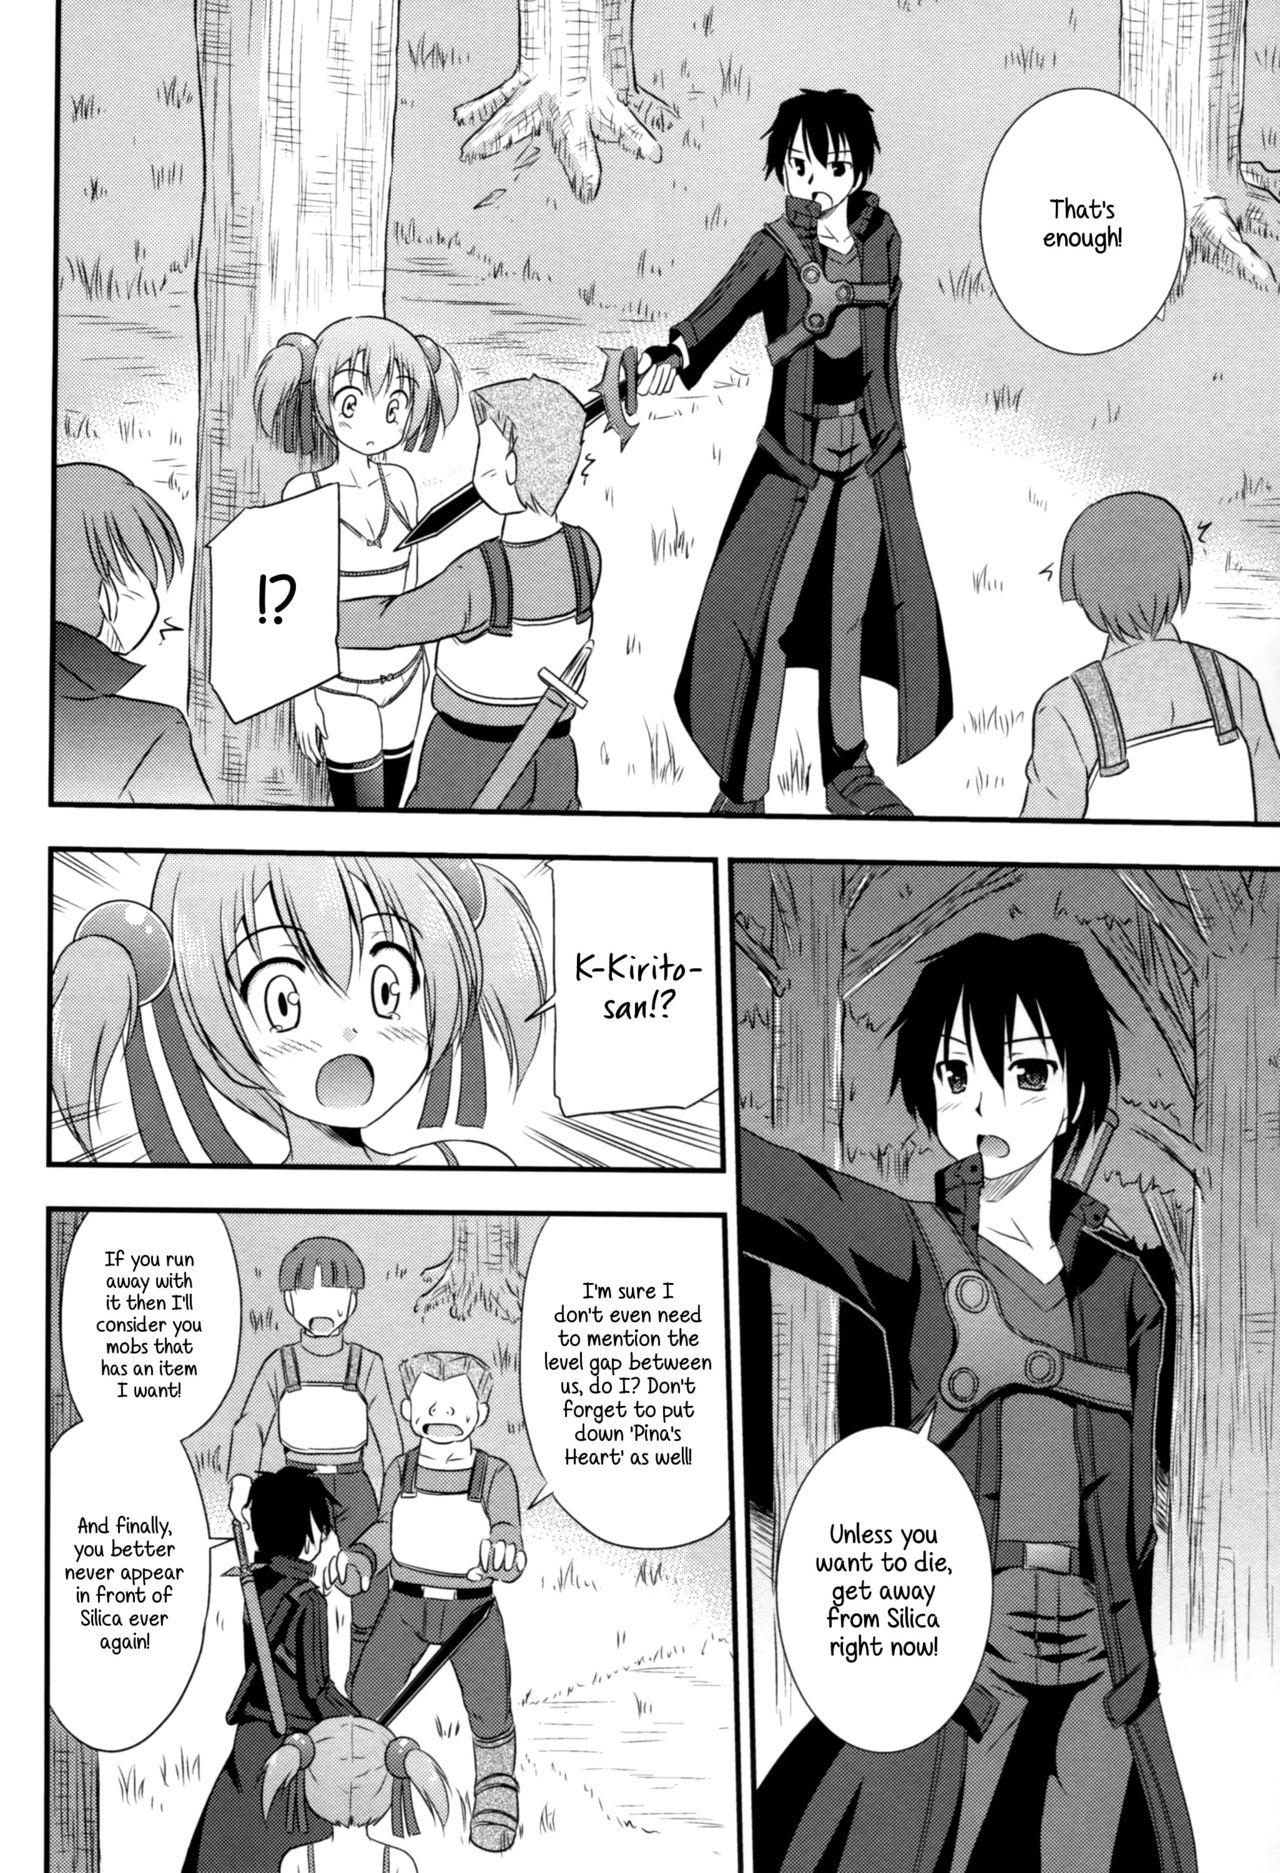 Sis Silica Route Online - Sword art online Pee - Page 9